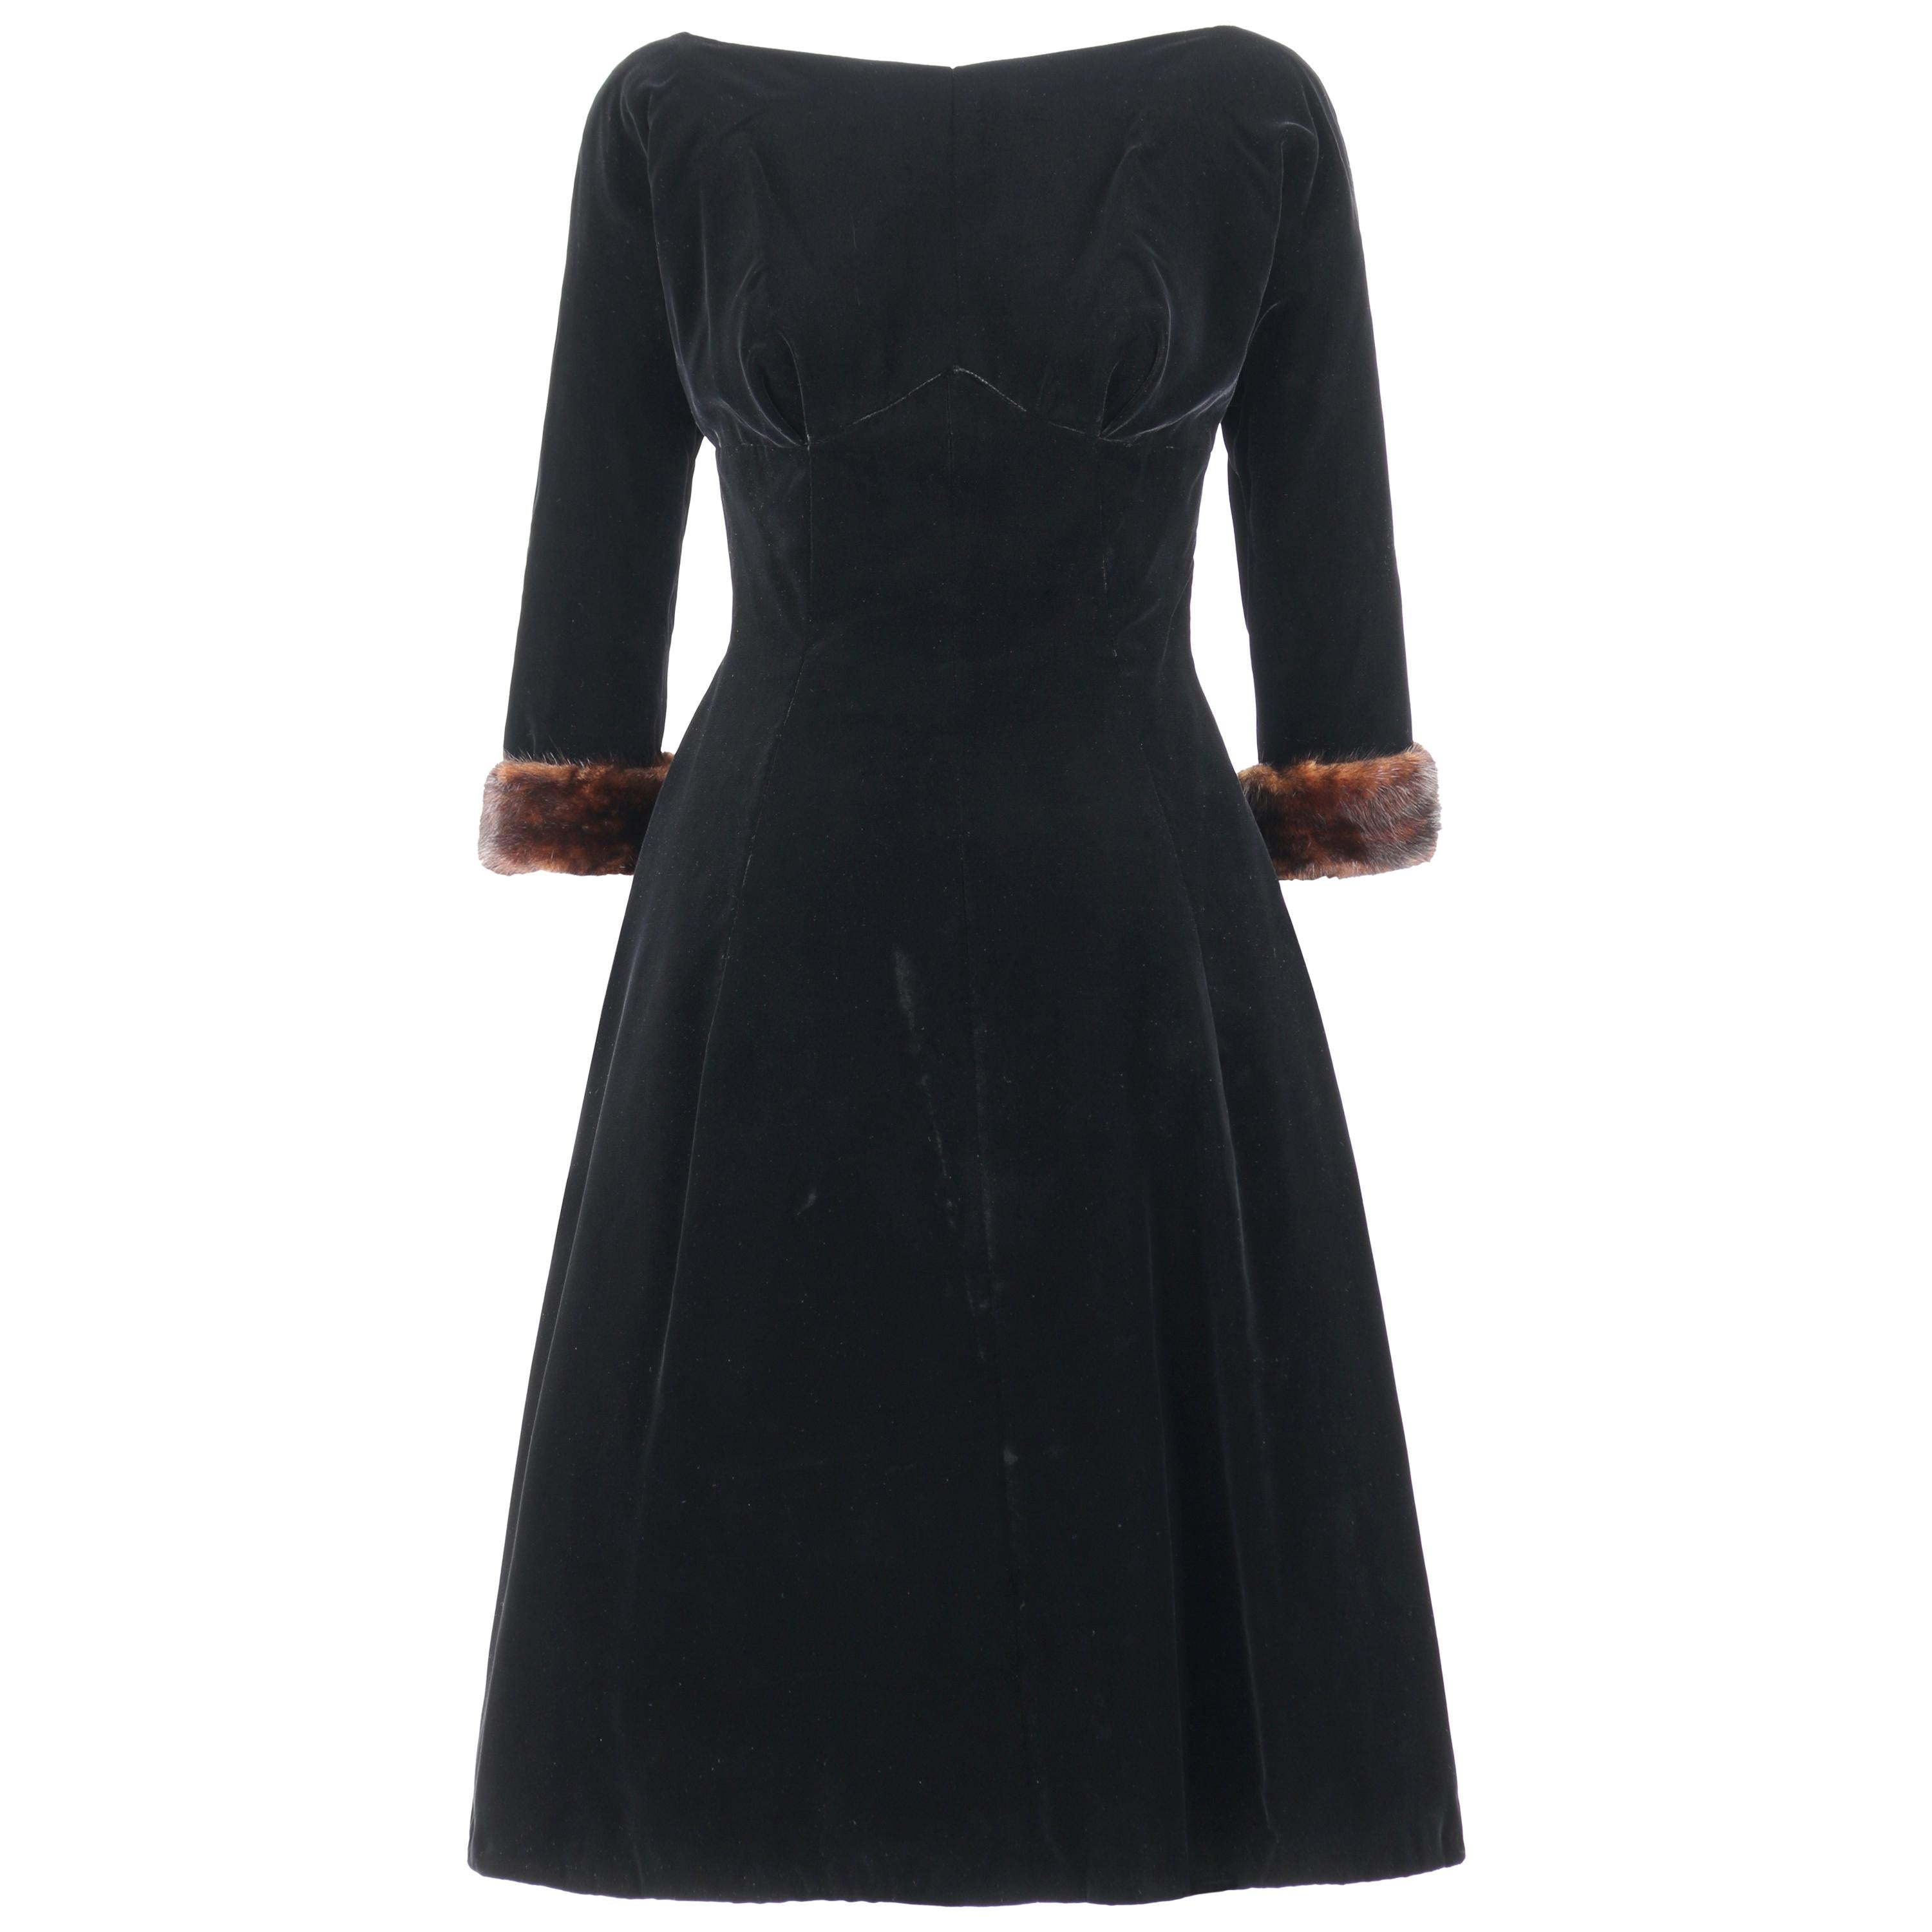 Young Modes CLAUDIA YOUNG c.1950's Black Velvet Mink Fur Cuff Cocktail Dress